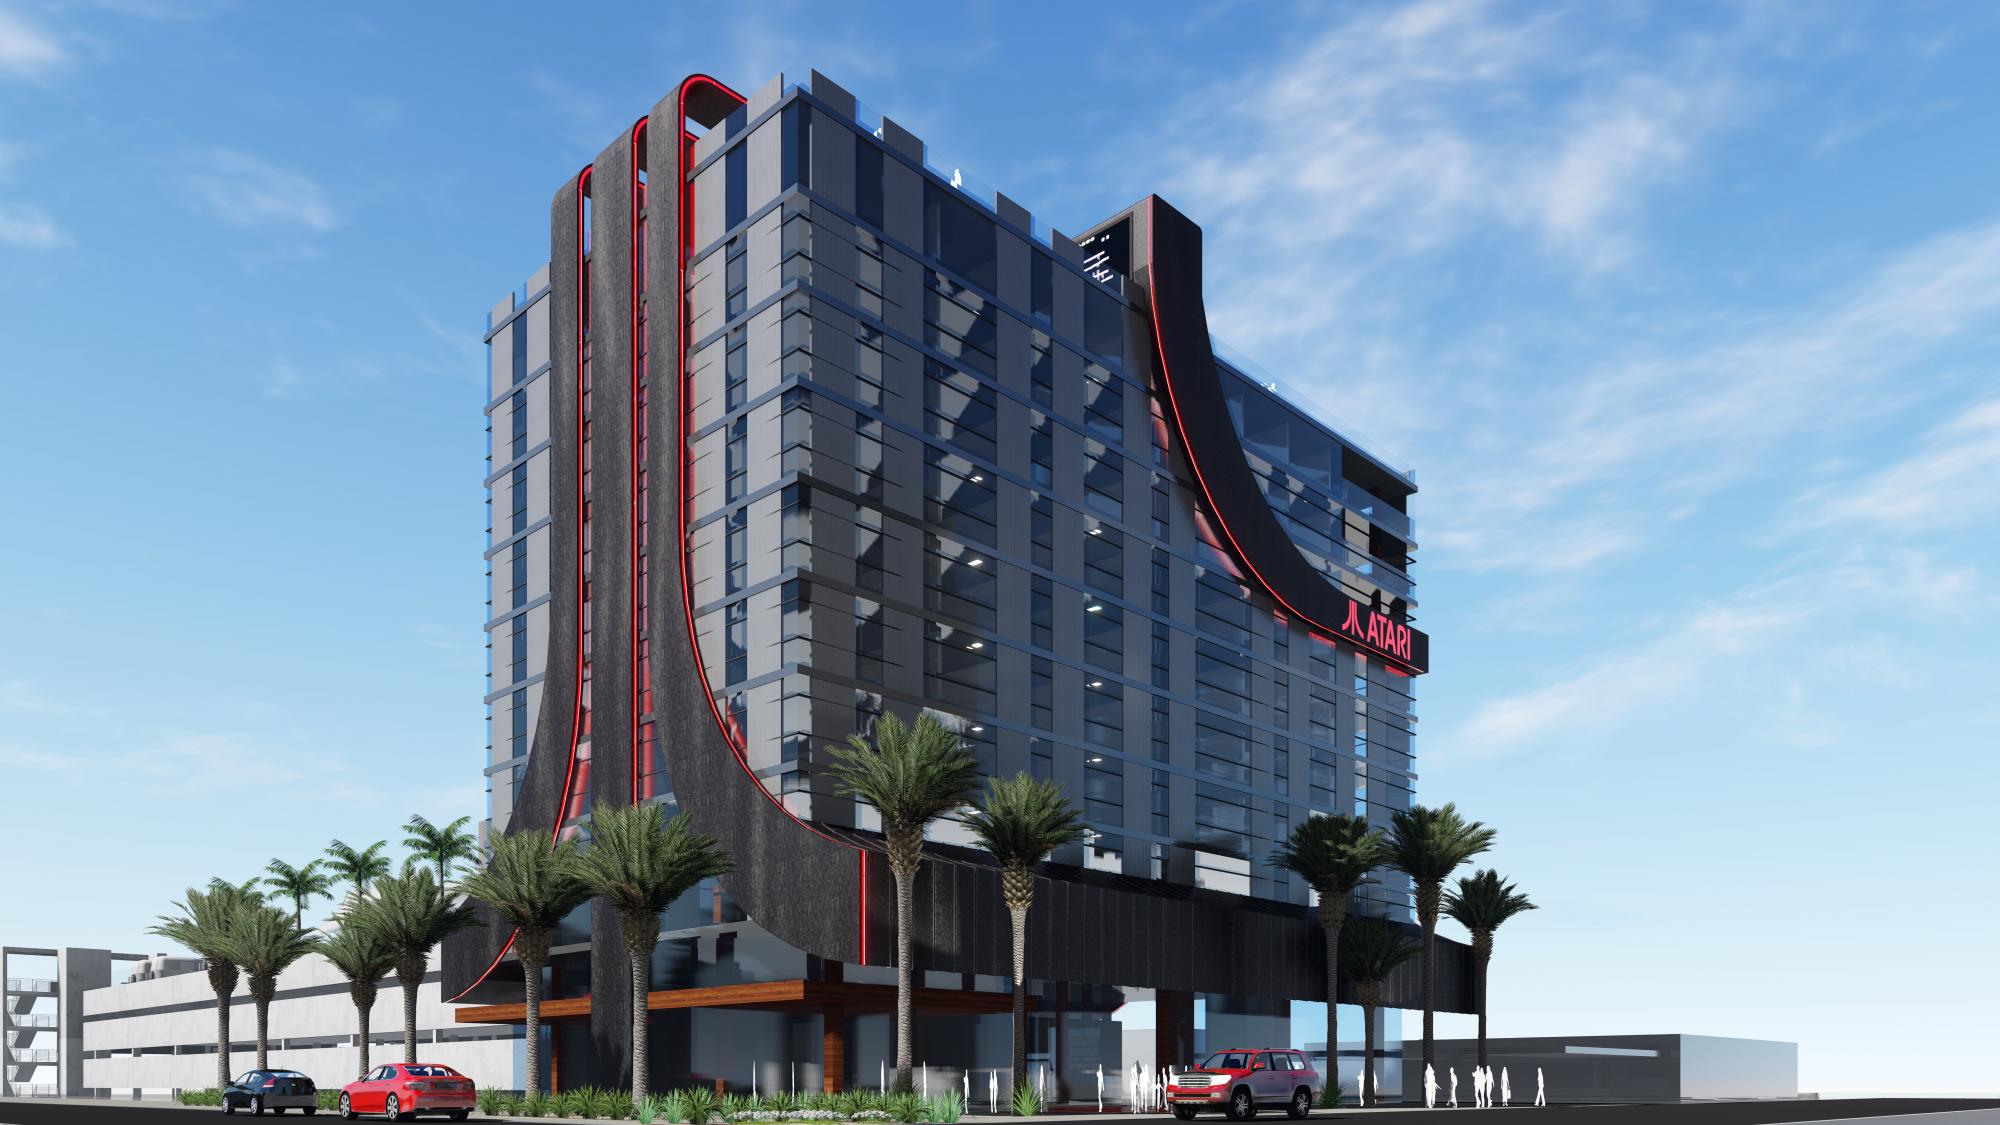 Atari-Themed “Gaming” Hotels Opening In The US